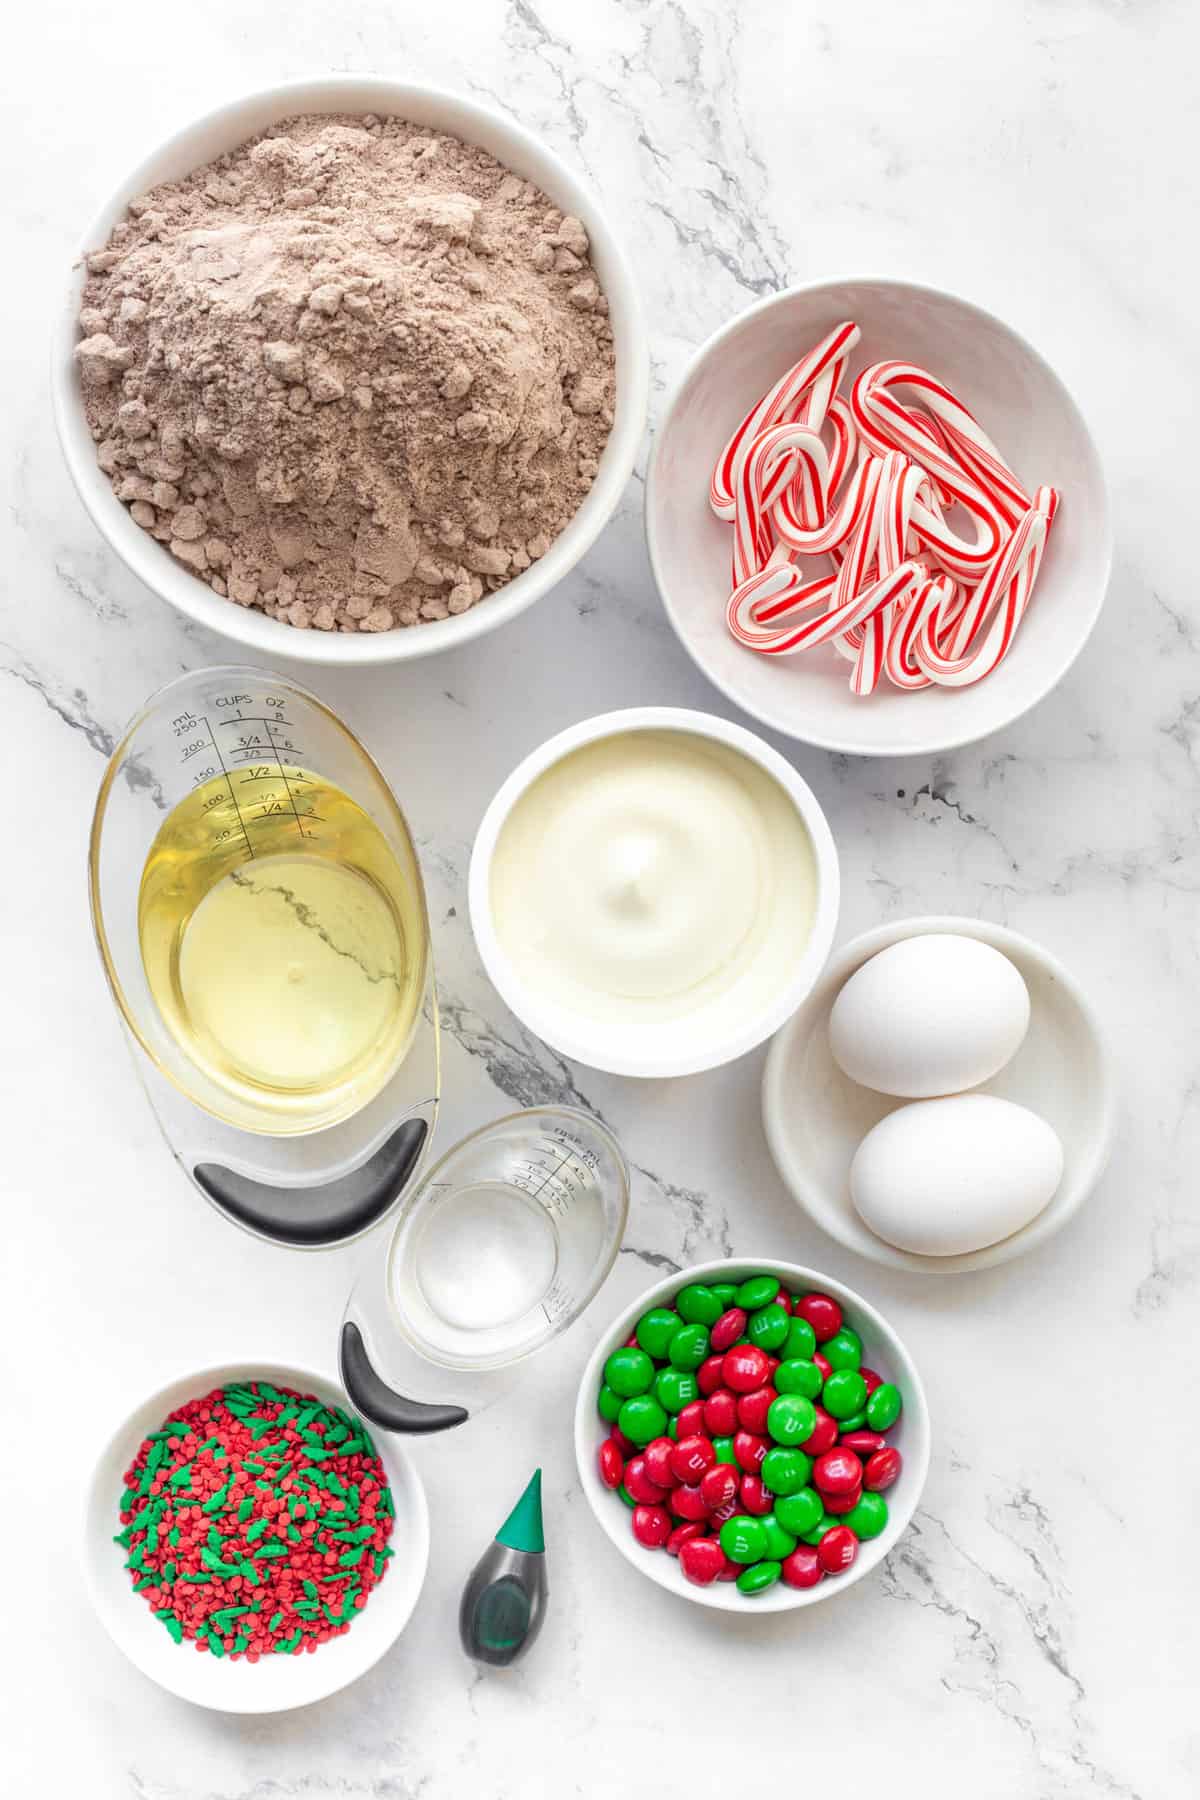 The ingredients to make Christmas tree brownies are shown portioned out on a white background: brownie mix, oil, sour cream, eggs, candy canes, and candy.